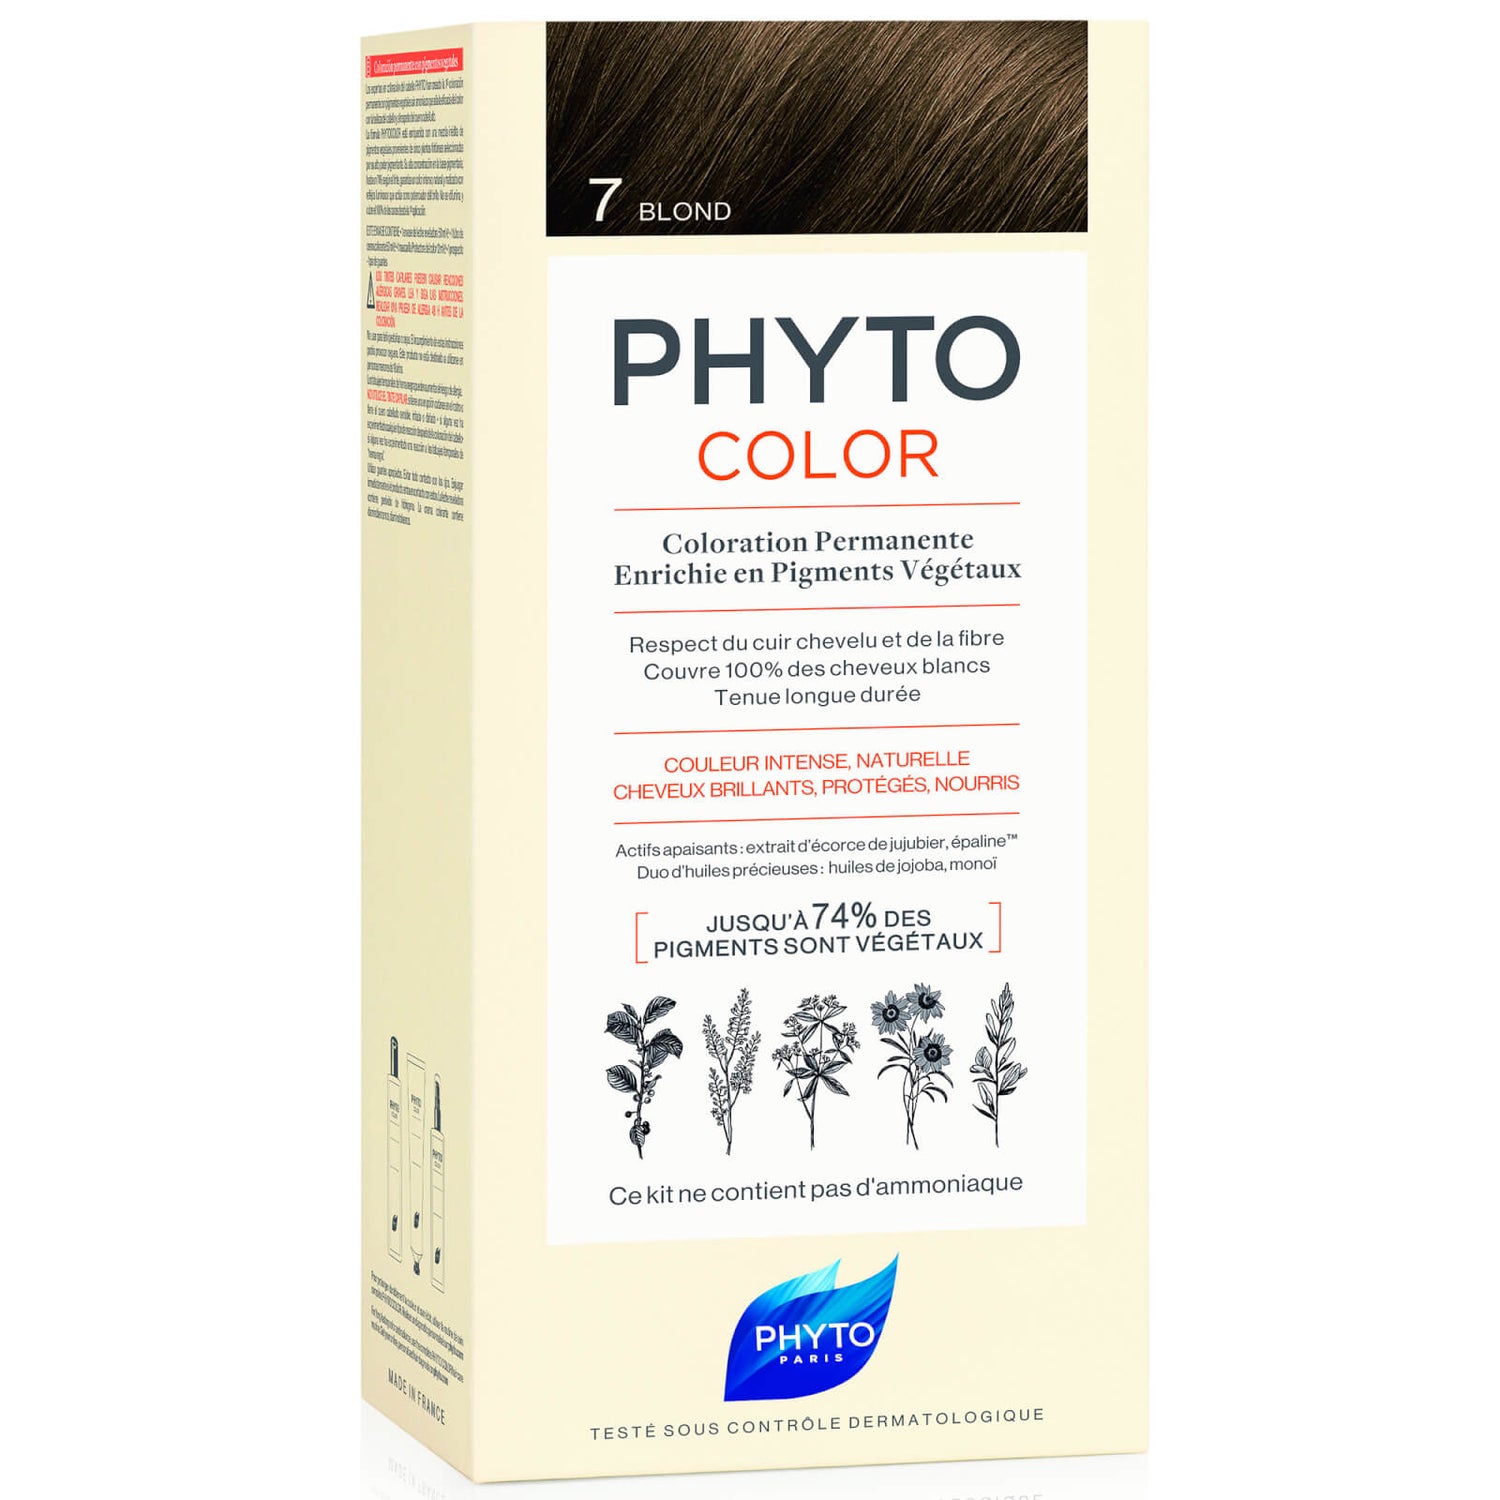 Phyto Hair Colour by Phytocolor - 7.3 Golden Blonde 180g